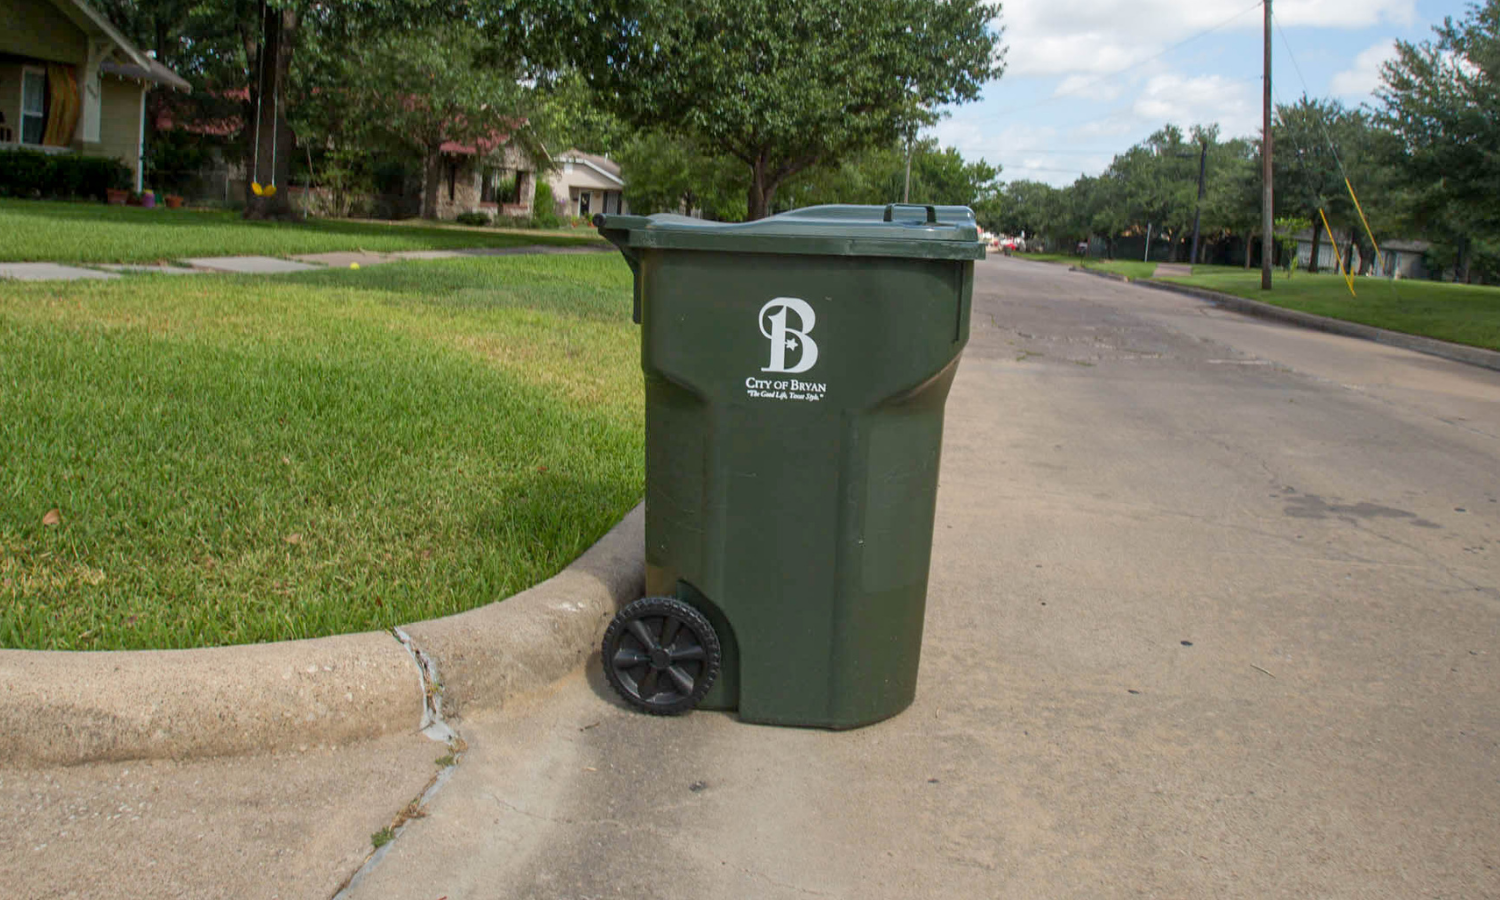 City of Bryan trash container on street